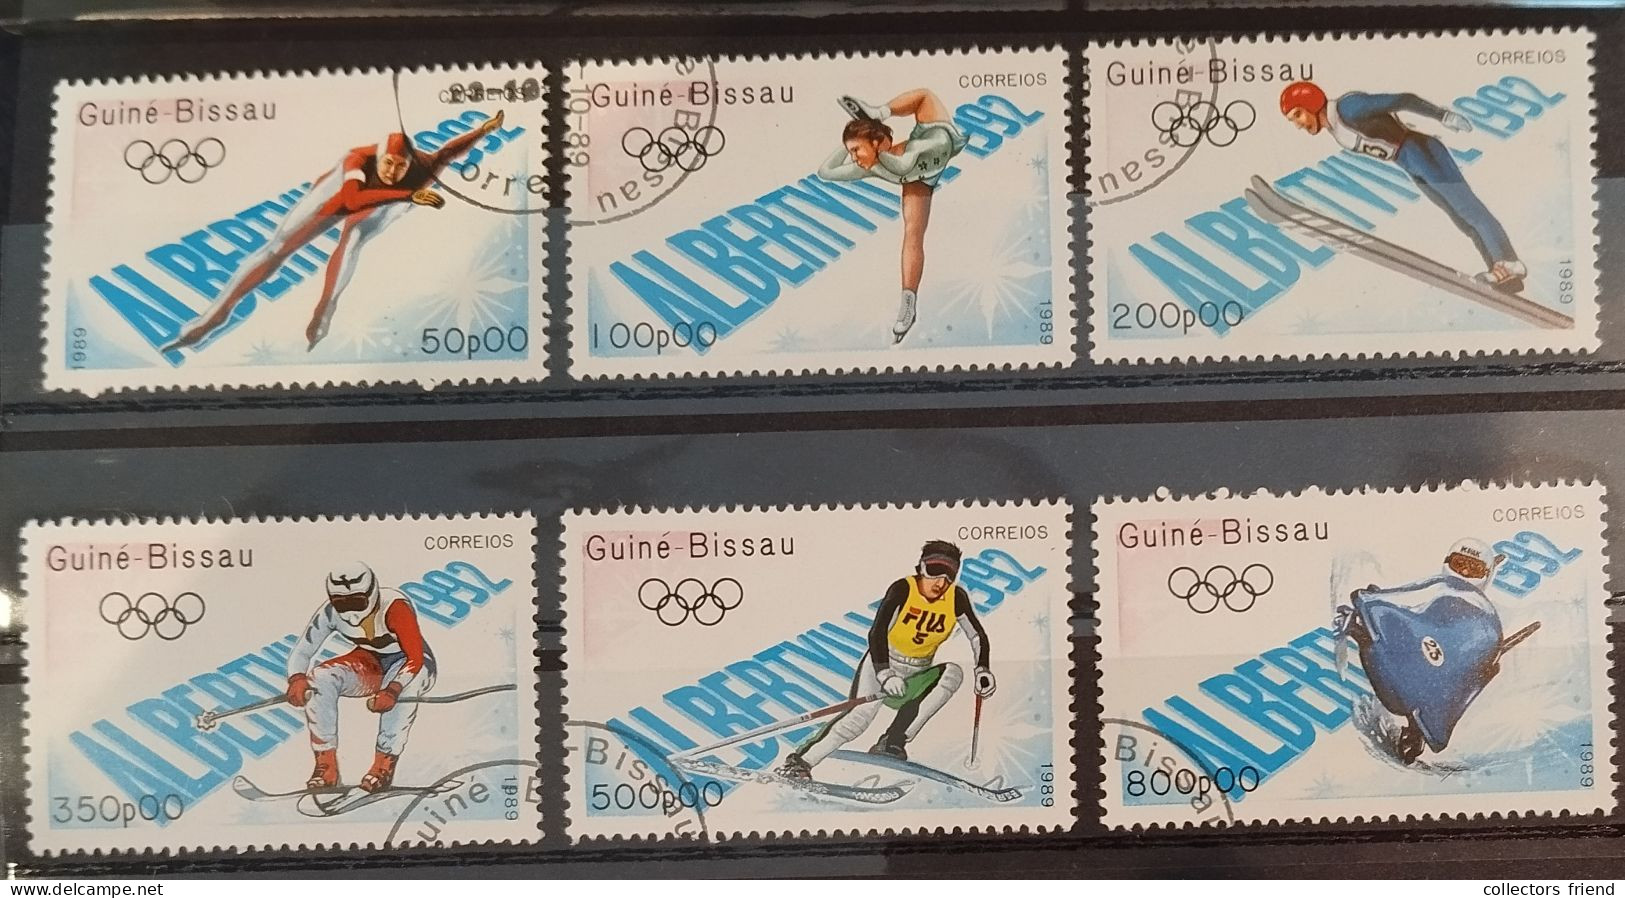 Guinea Bissau - Olympia Olimpiques Olympic Games -  Albertville '92 - 6 Stamps - Used - Inverno1992: Albertville